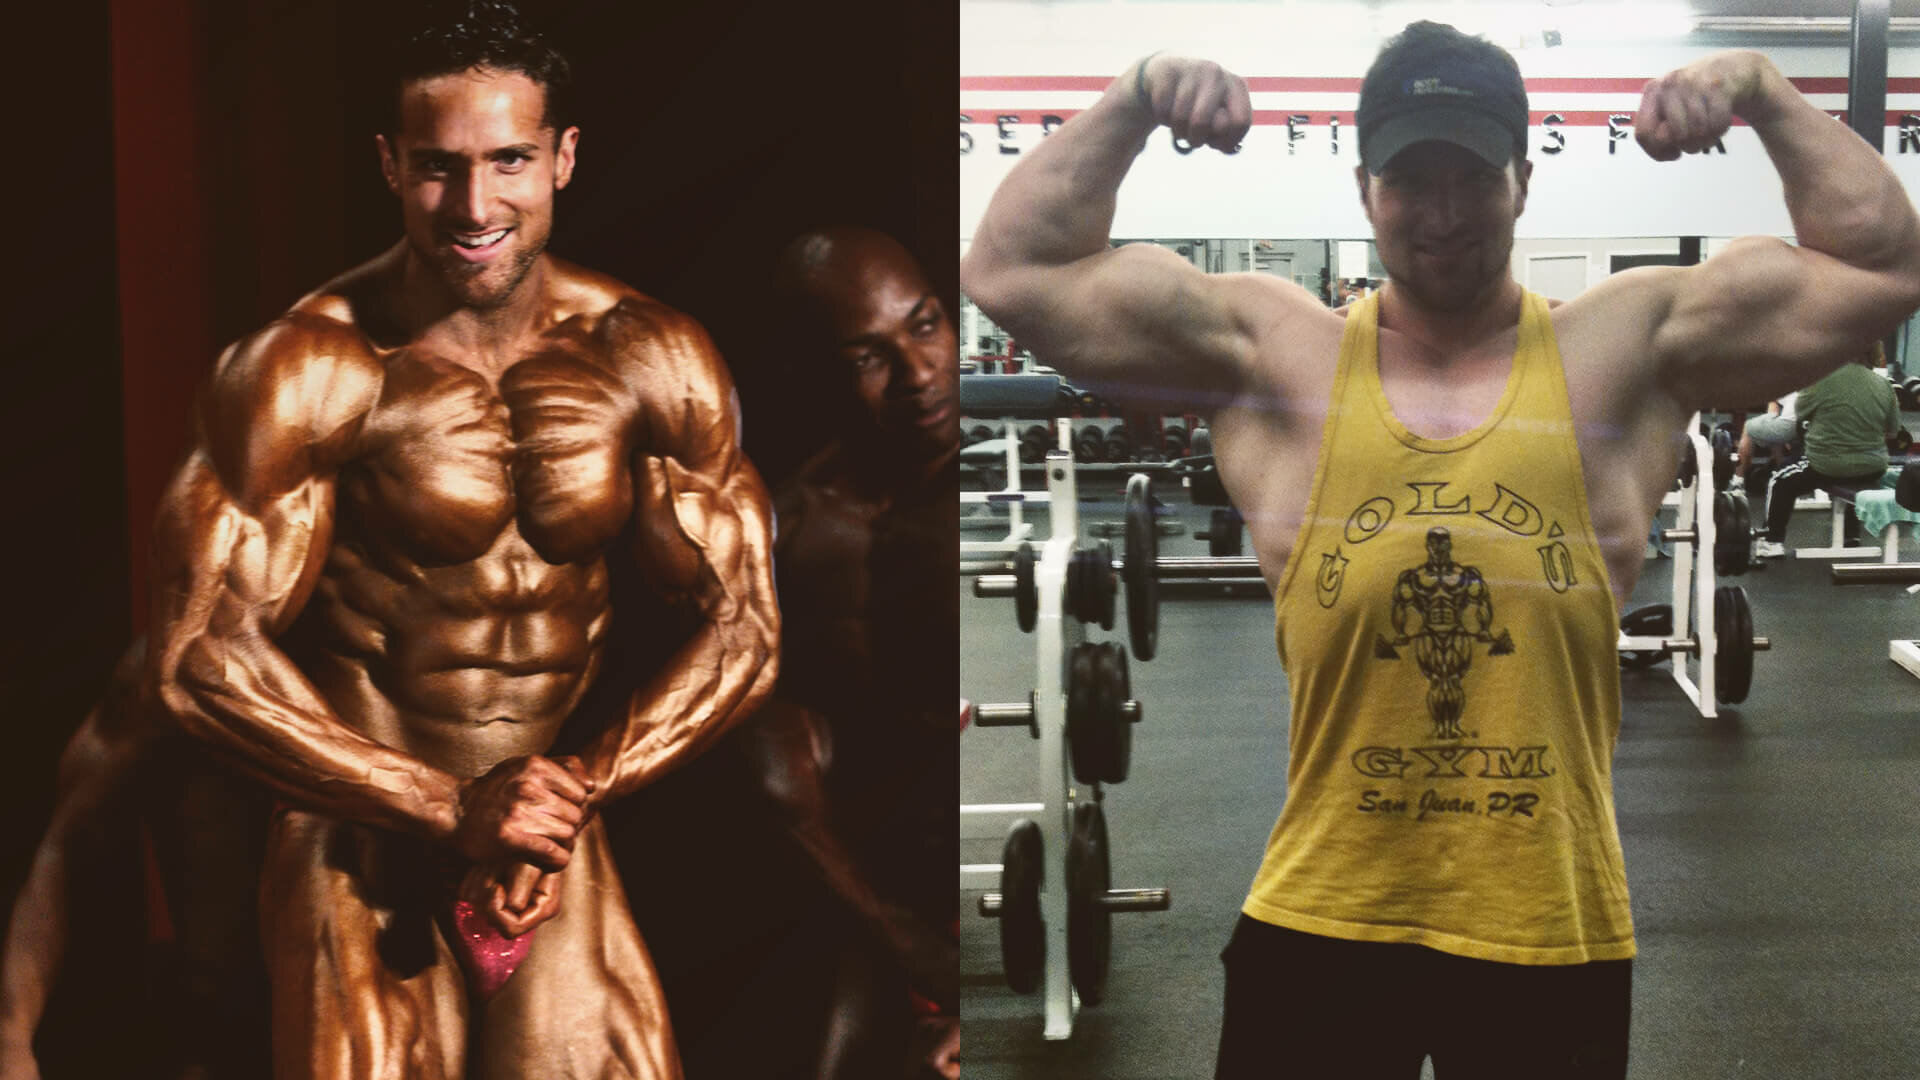 Layne NorCan You Build Muscle and Lose Fat at The Same Time? - Biolayneton